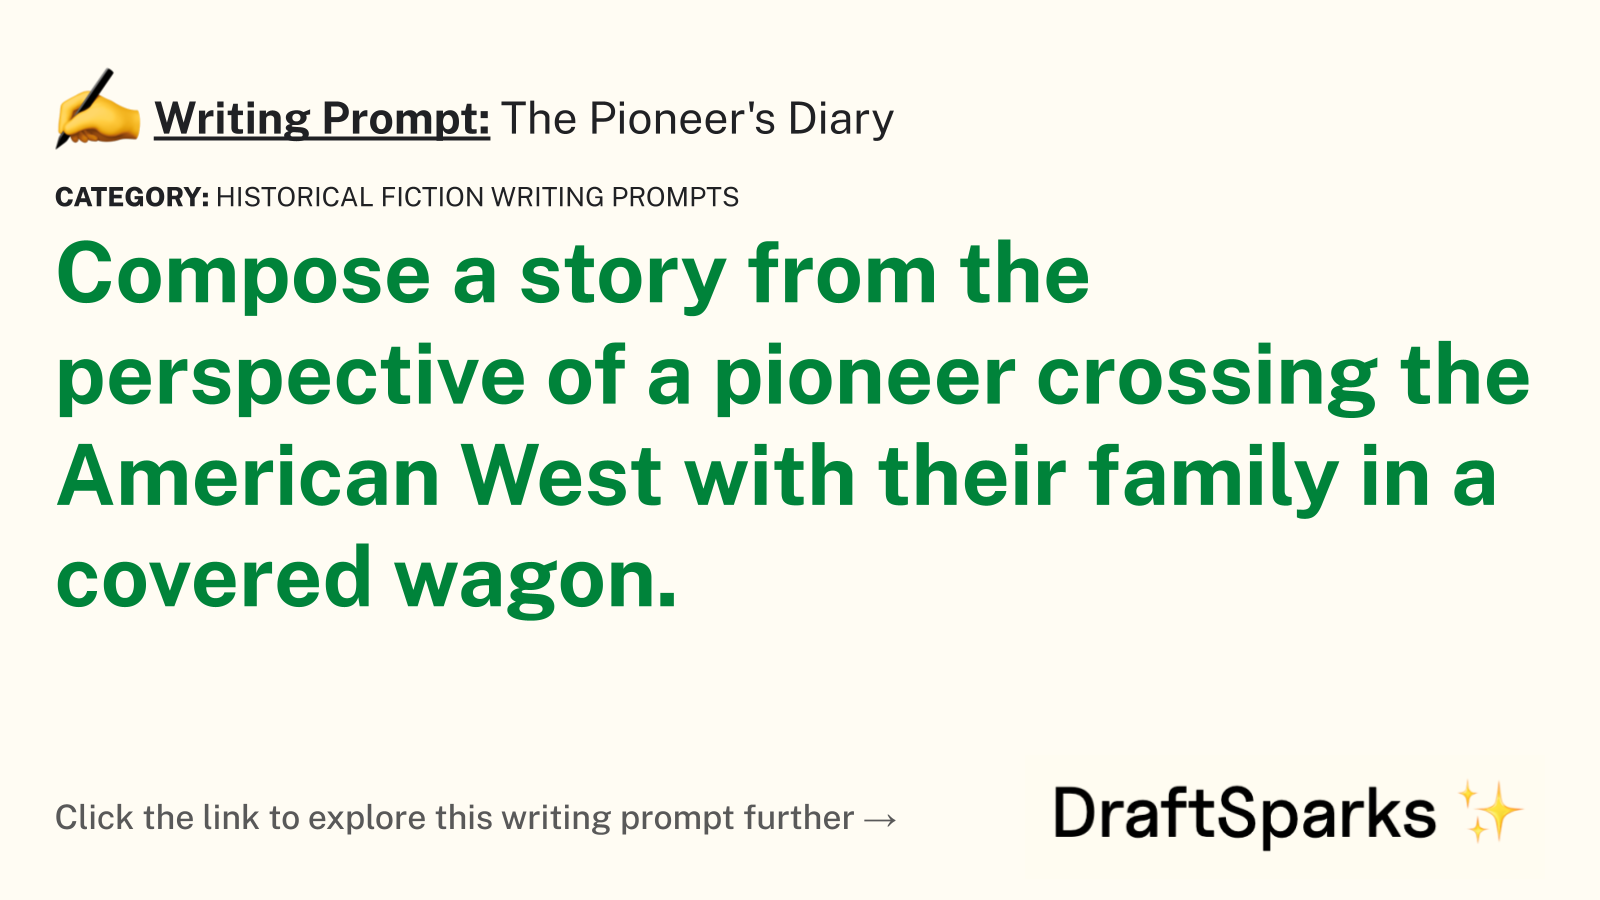 The Pioneer’s Diary